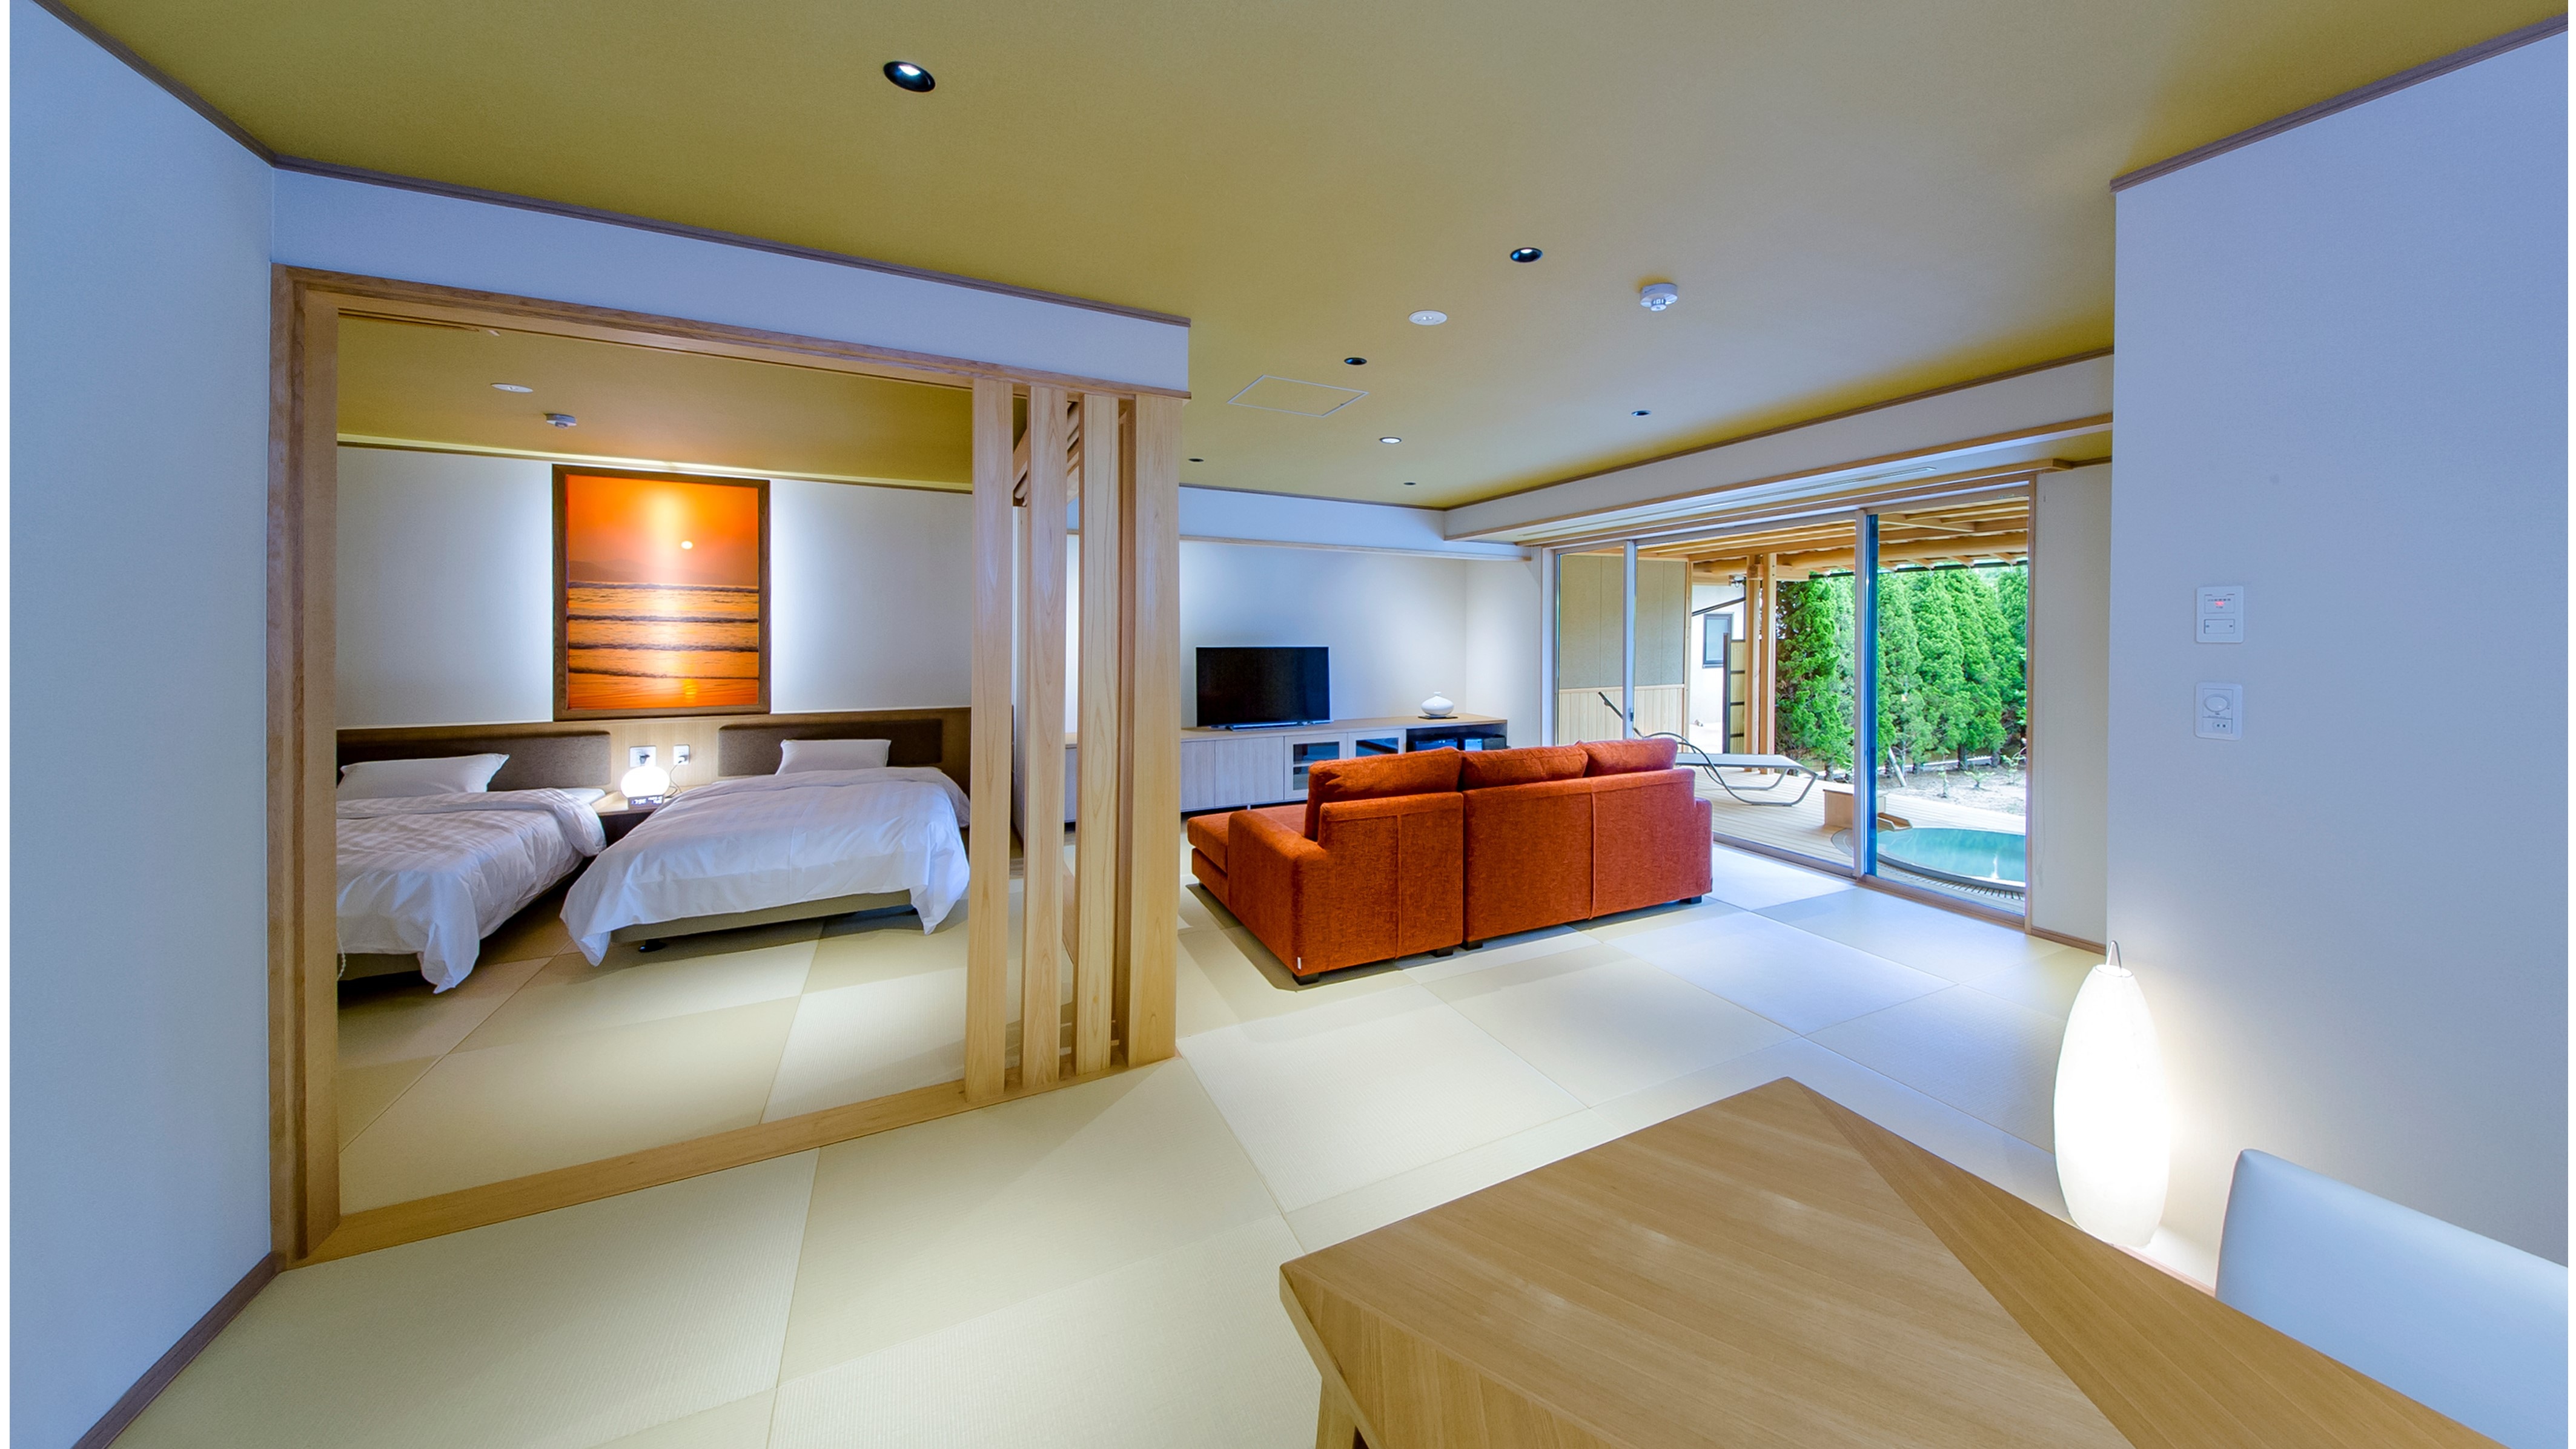 [Special room away] Newly opened in July 2020, a living room with 18 tatami mats and a bedroom with 8 tatami mats are spacious.